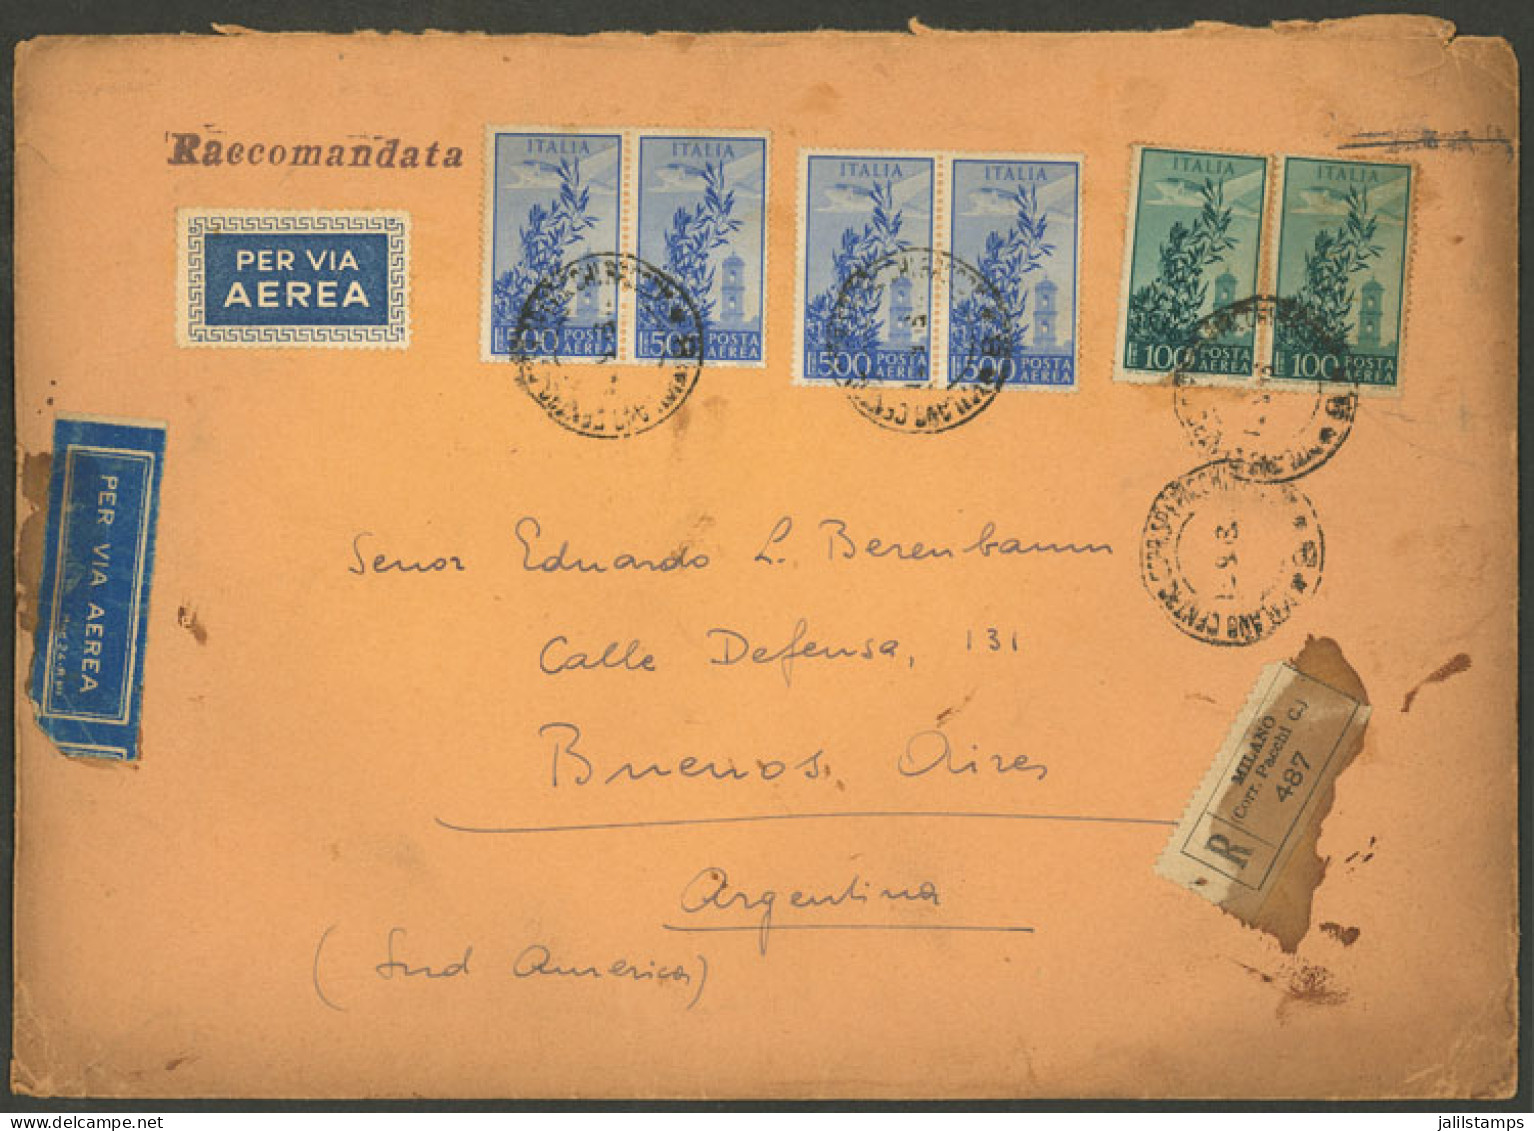 ITALY: 15/SE/1948 Milano - Argentina, Registered Airmail Cover Franked With 2,200 L., Some Small Defects, Very Nice! - Zonder Classificatie